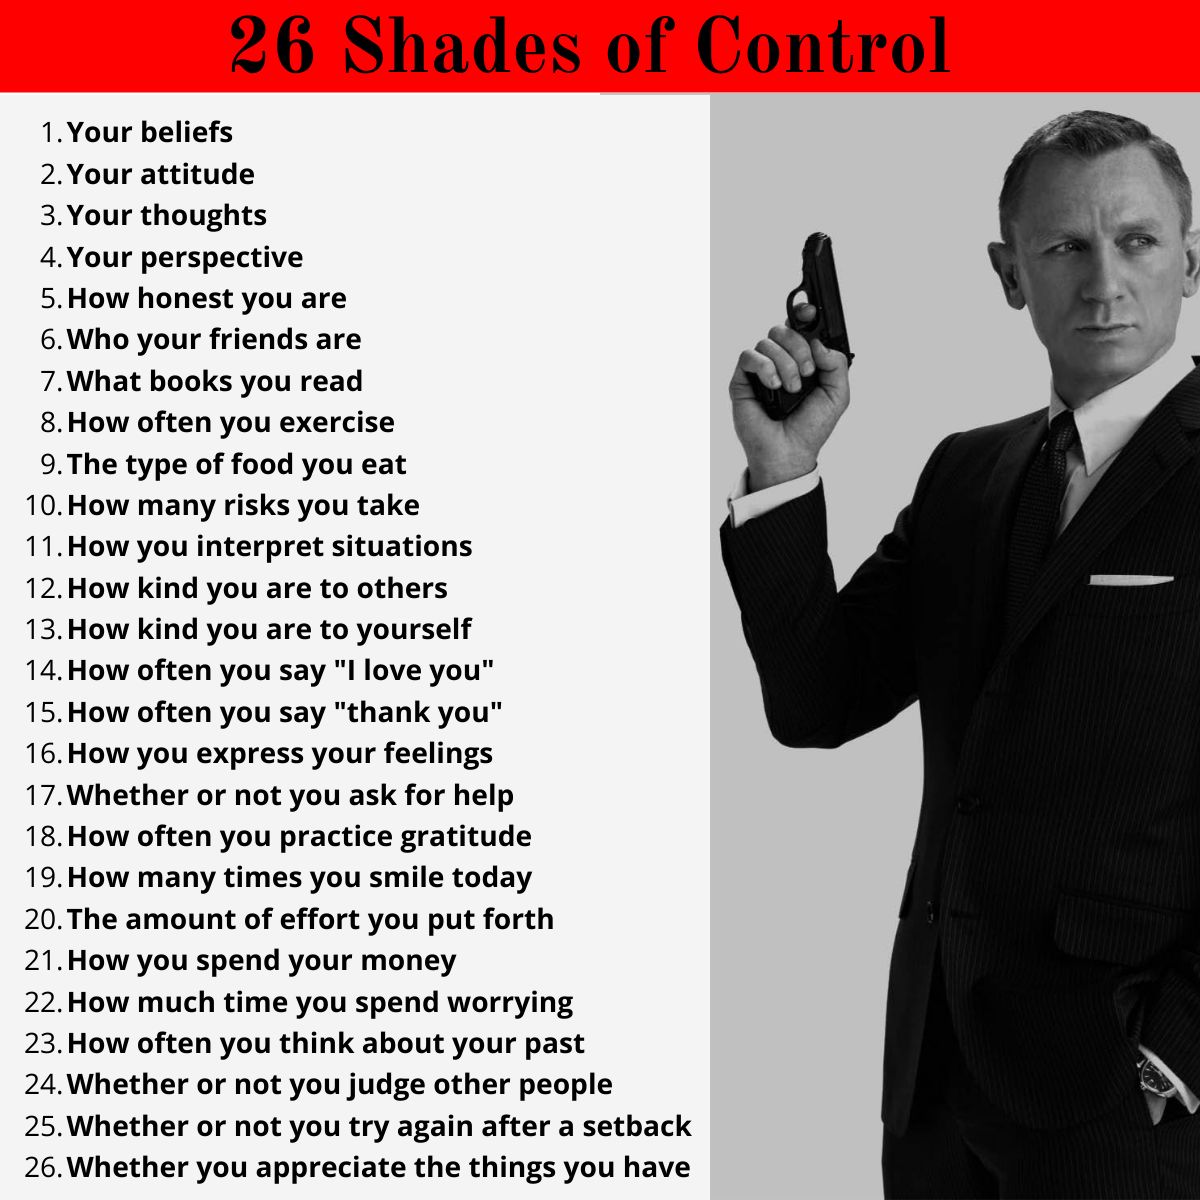 26 Shades of Control: Be Our Own 007